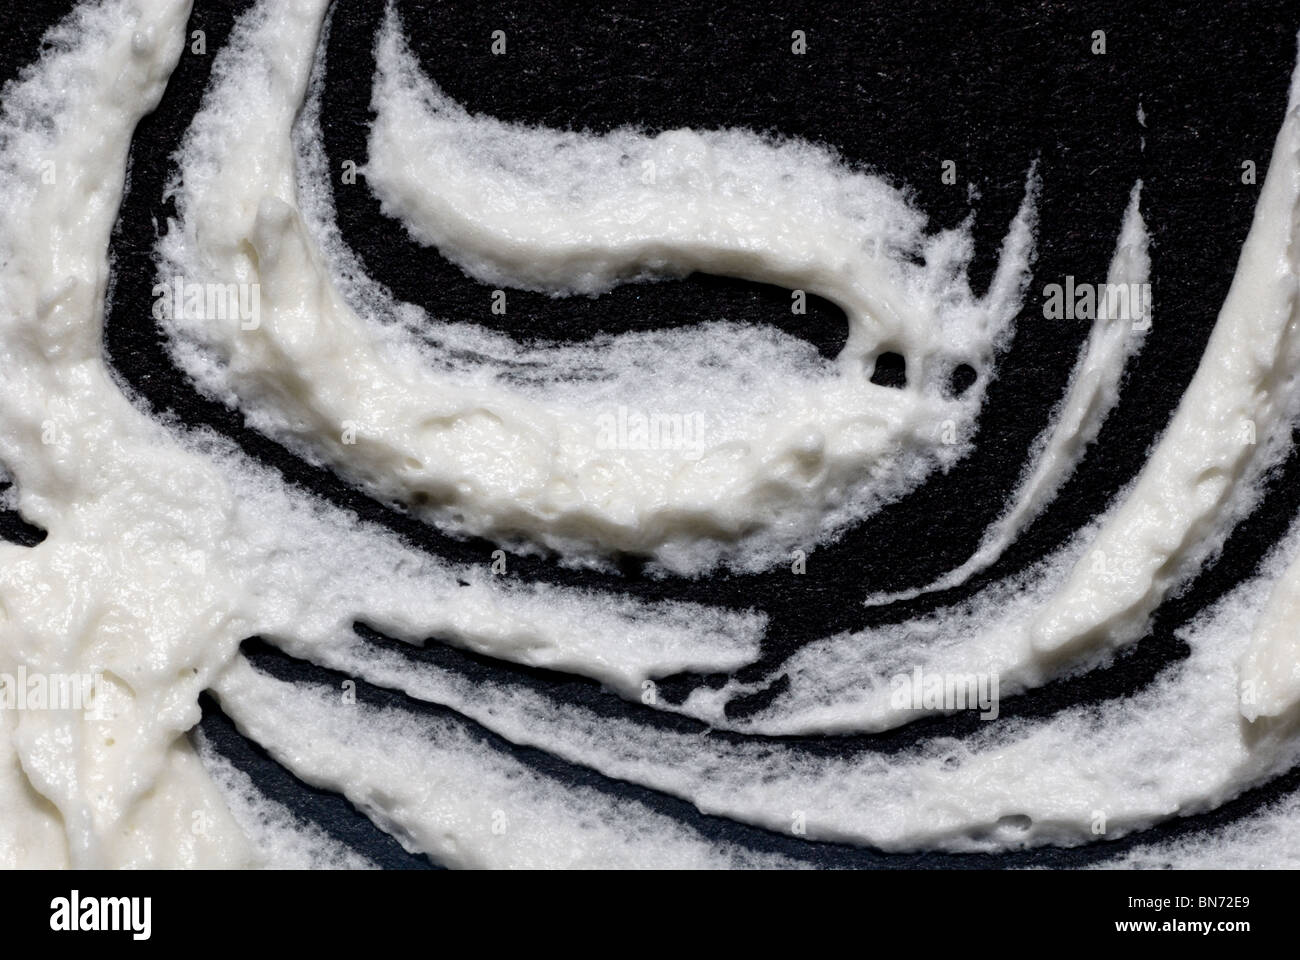 A spooky image of a ghost flying through the air is made with white buttercream icing on a black foam board. Stock Photo